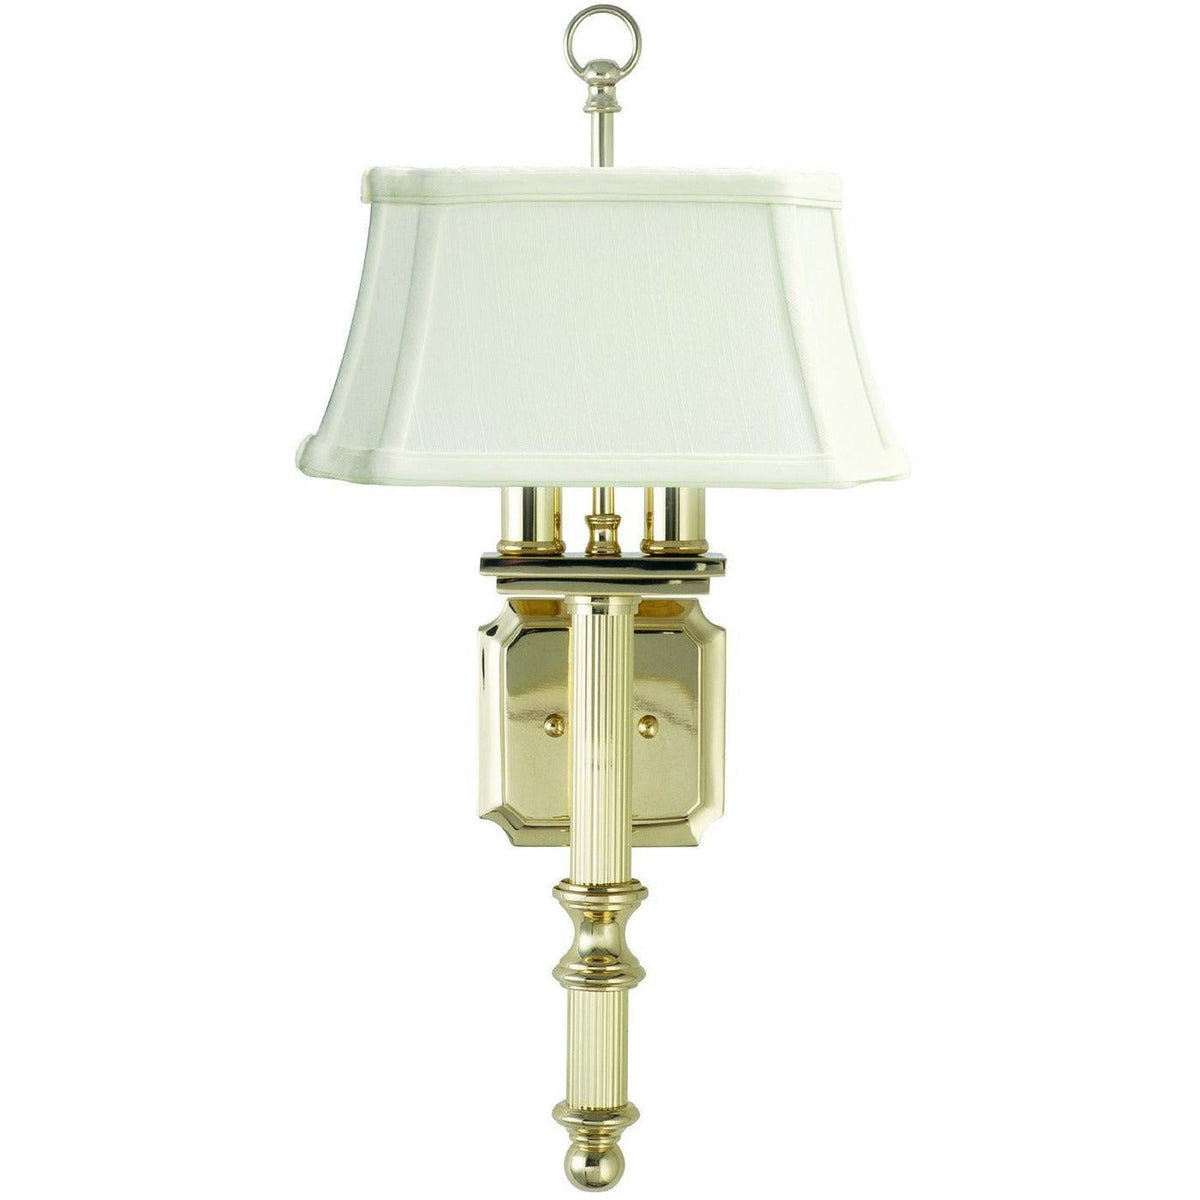 House of Troy - Decorative Wall Lamp 9-Inch Two Light Wall Sconce - WL616-PB | Montreal Lighting & Hardware